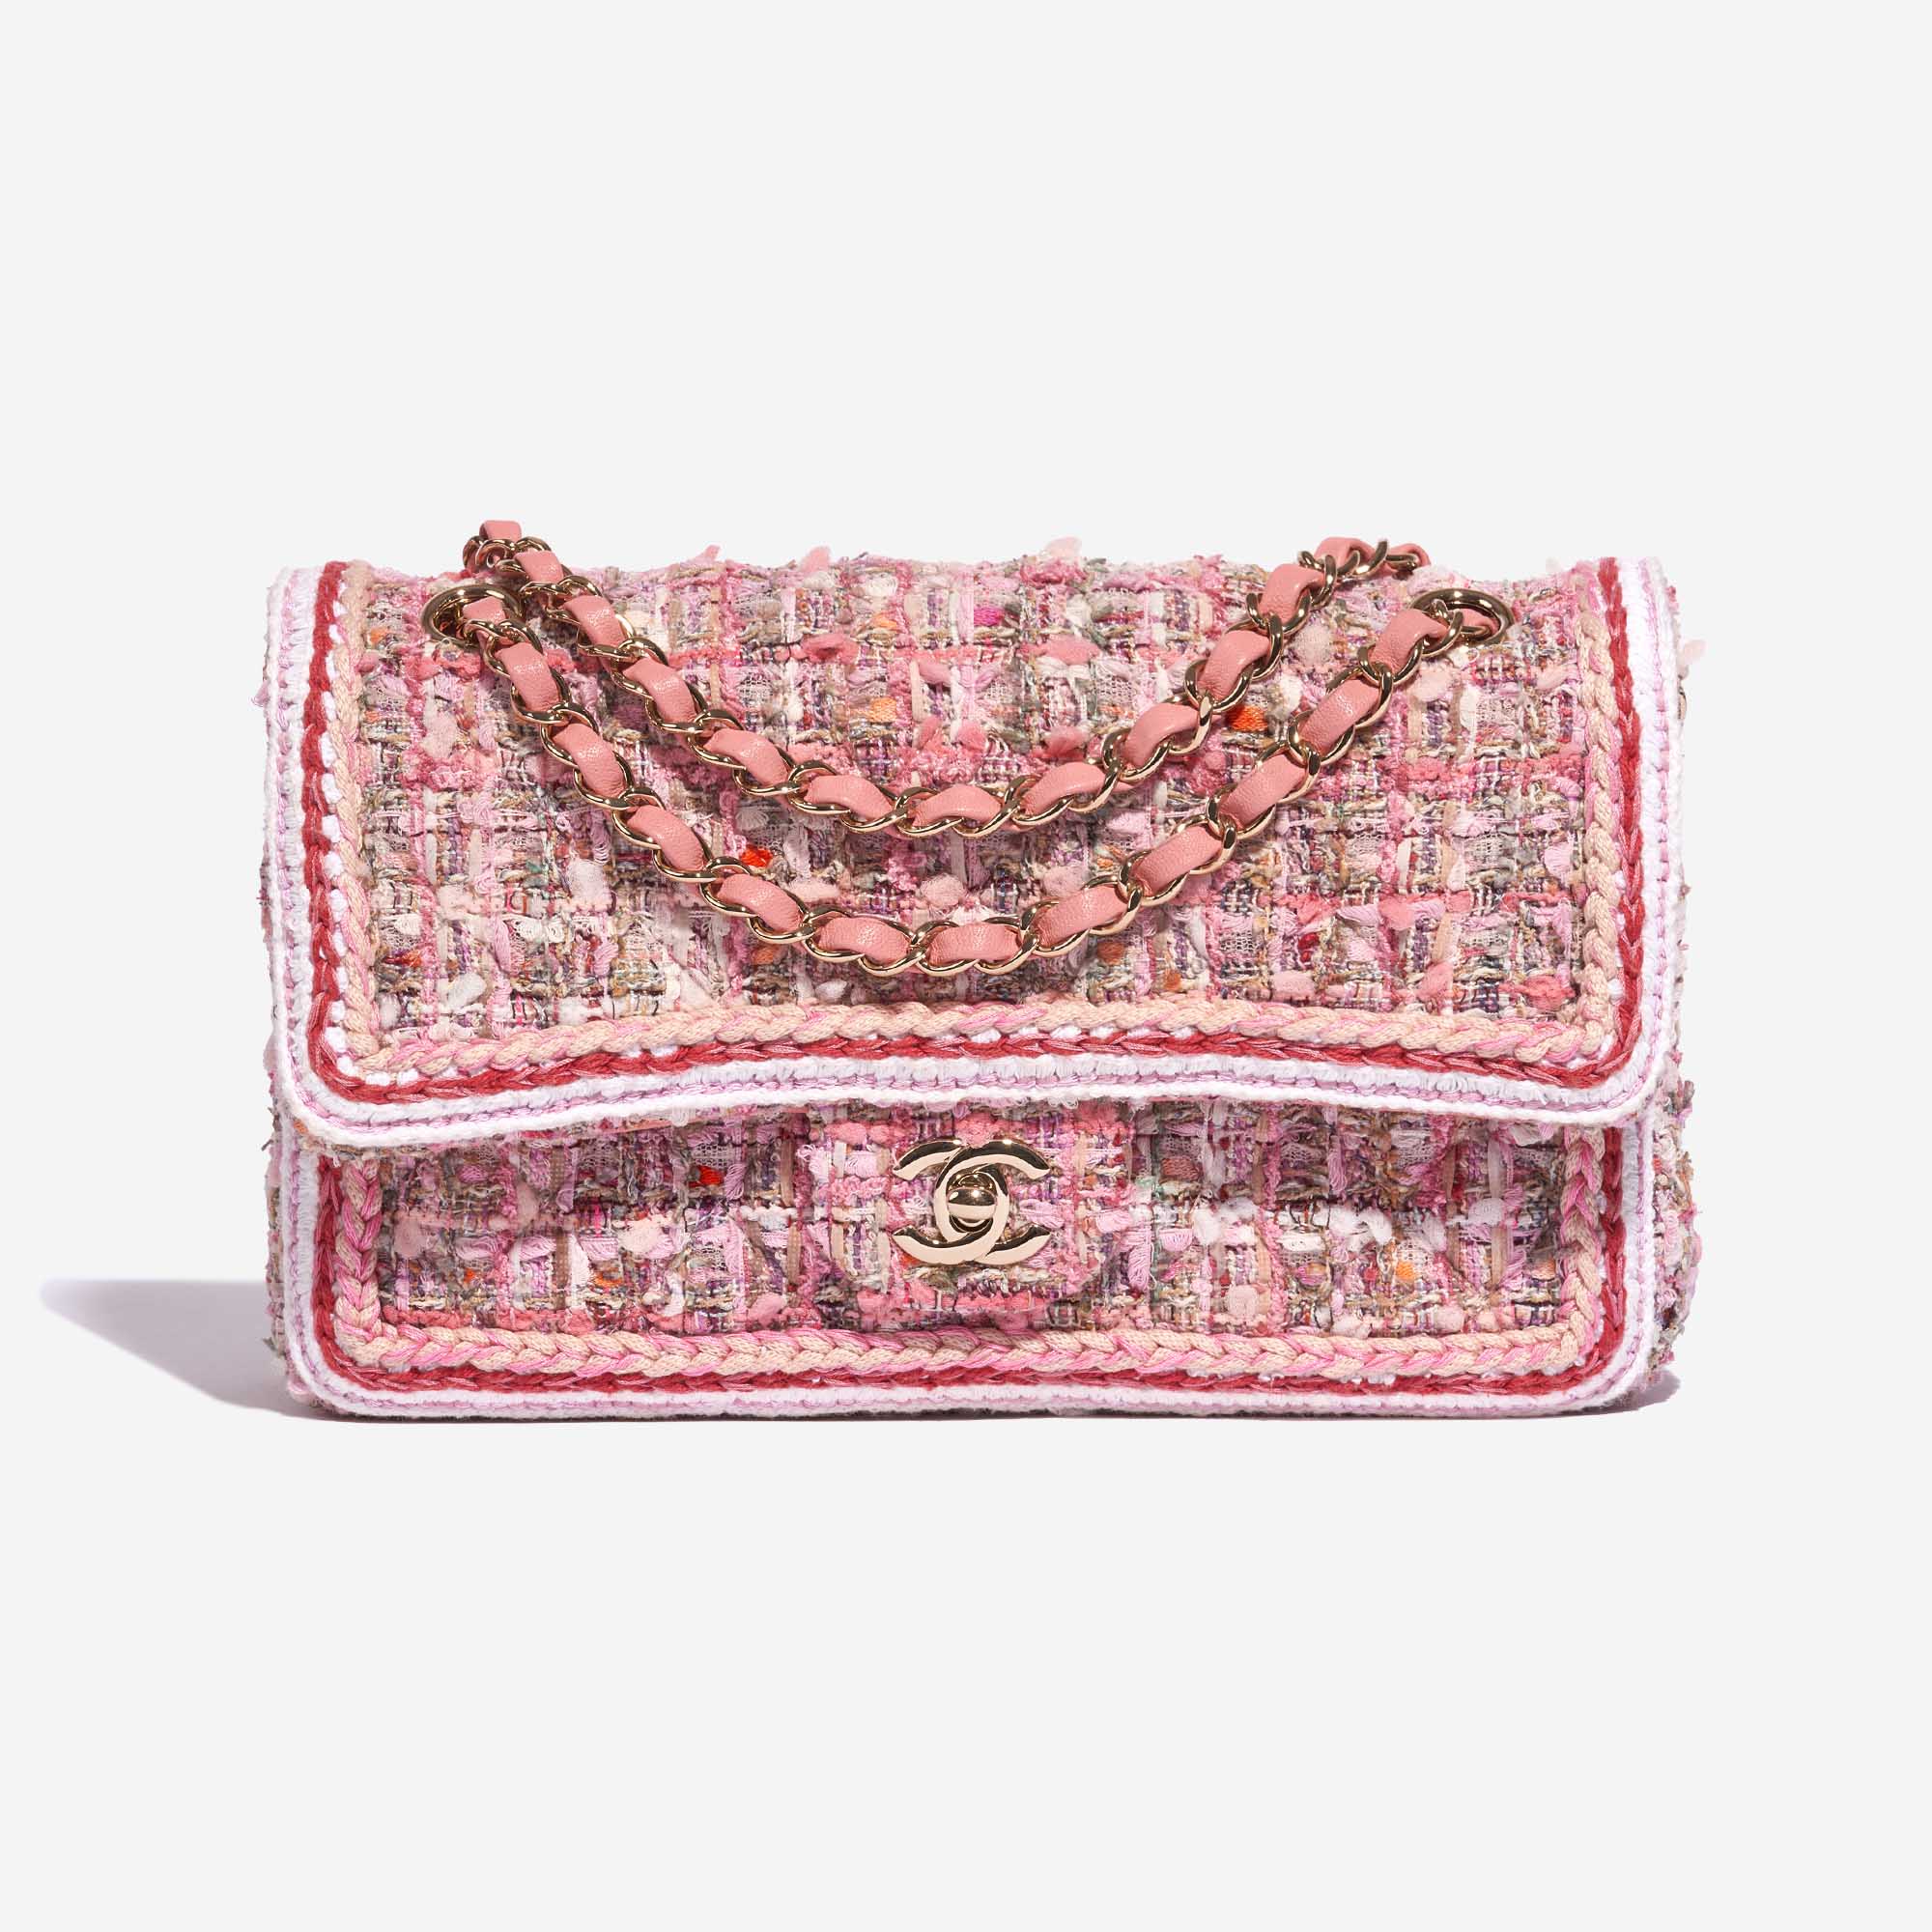 Chanel - Authenticated Timeless/Classique Handbag - Tweed Pink for Women, Good Condition